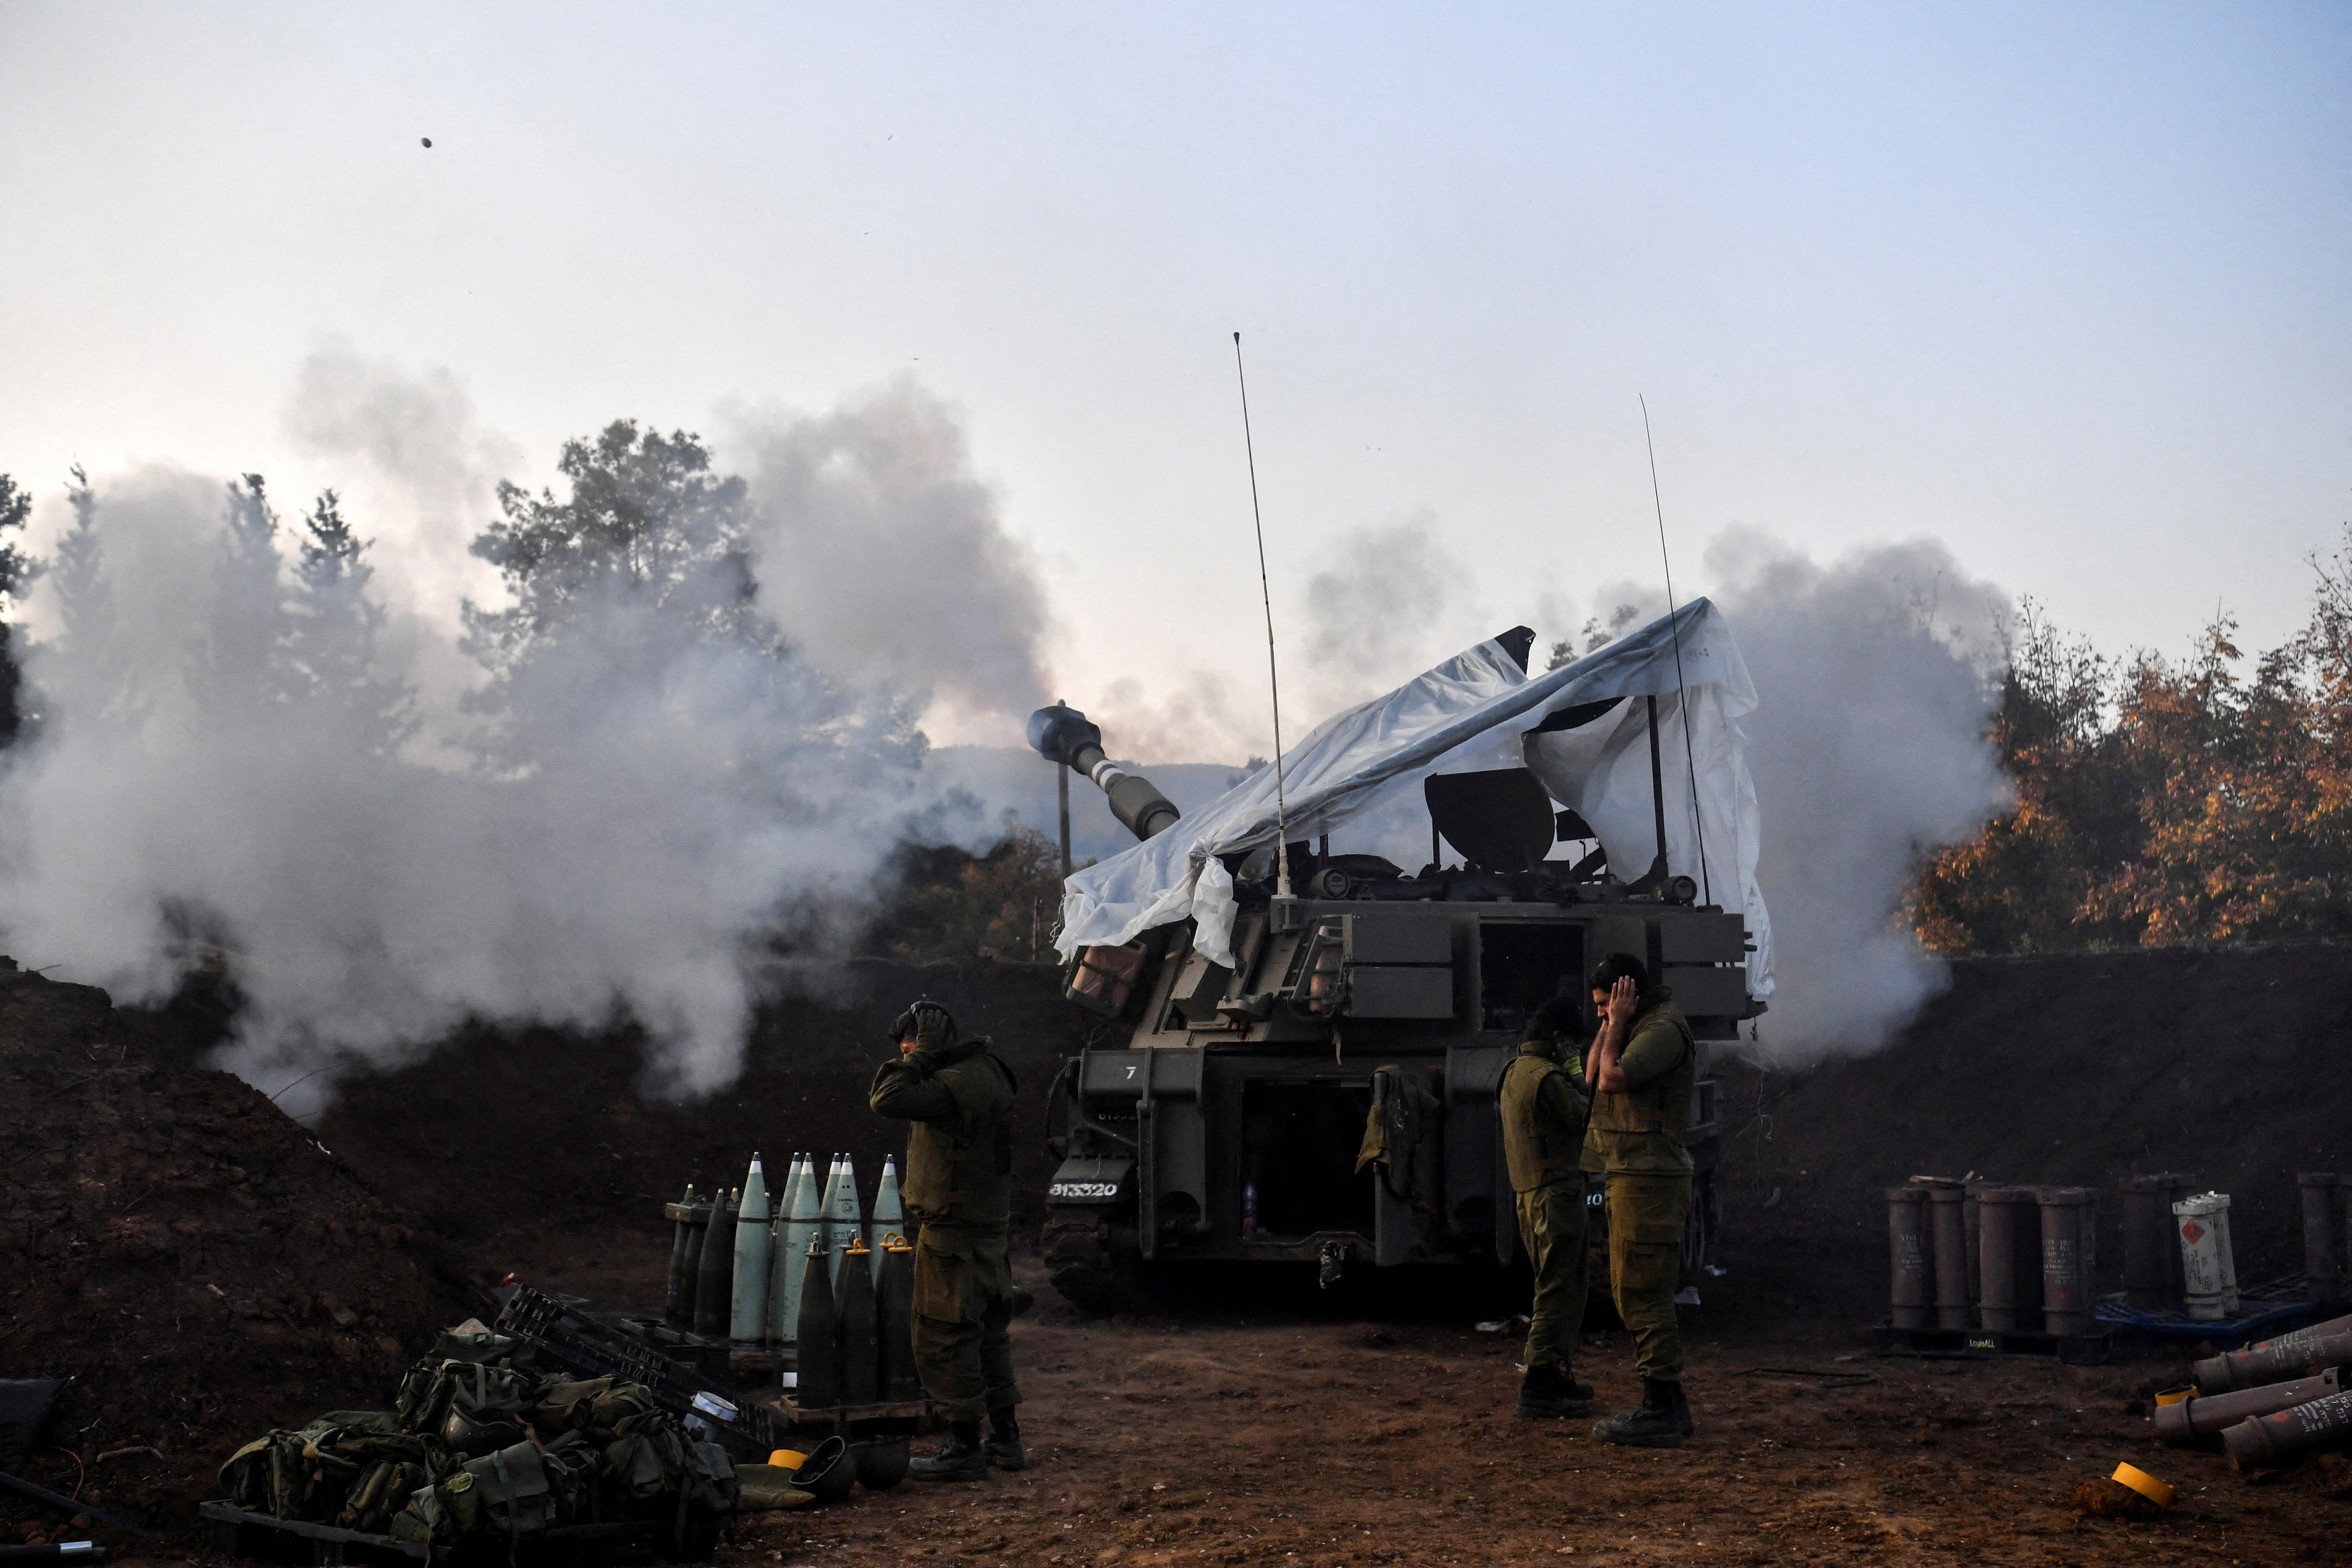 Israeli soldiers stand by, as a mobile artillery unit fires, on the Israeli side of the Israel-Lebanon border